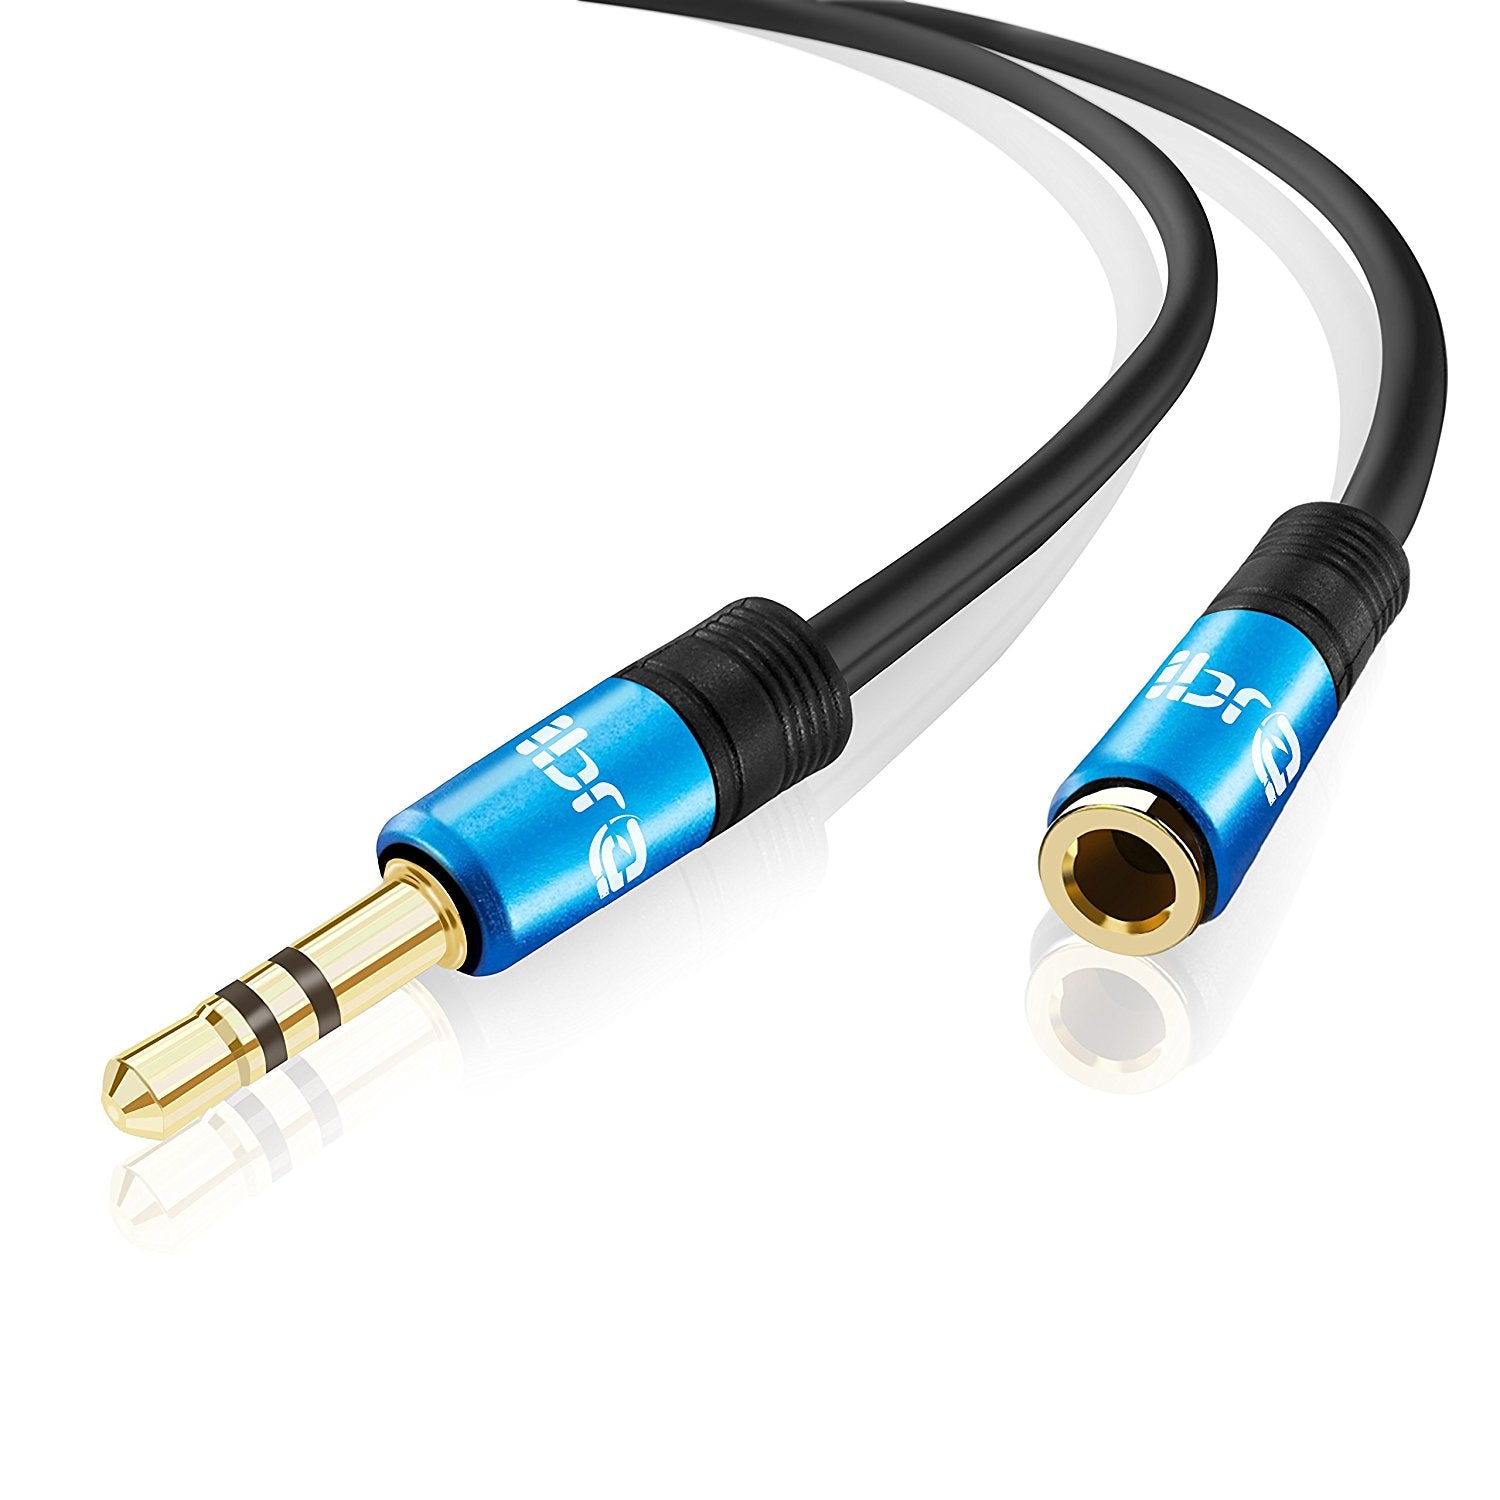 IBRA 3M Stereo Jack Extension Cable 3.5mm Male > 3.5mm Female - Blue